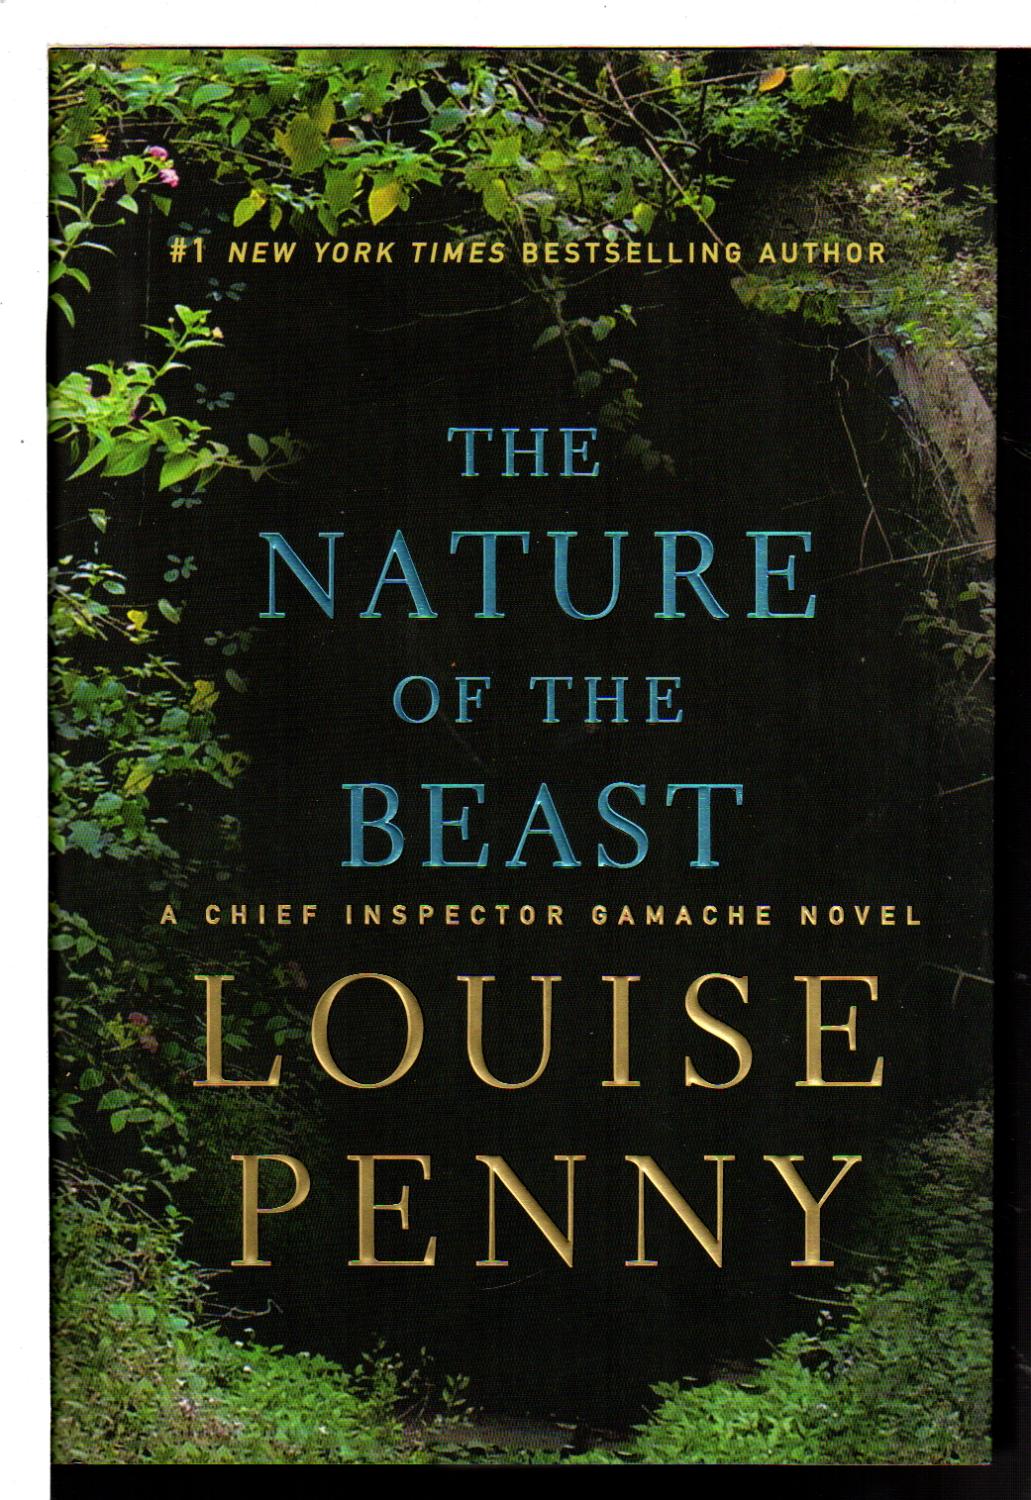 The Nature of the Beast: A Chief Inspector Gamache Novel [Book]